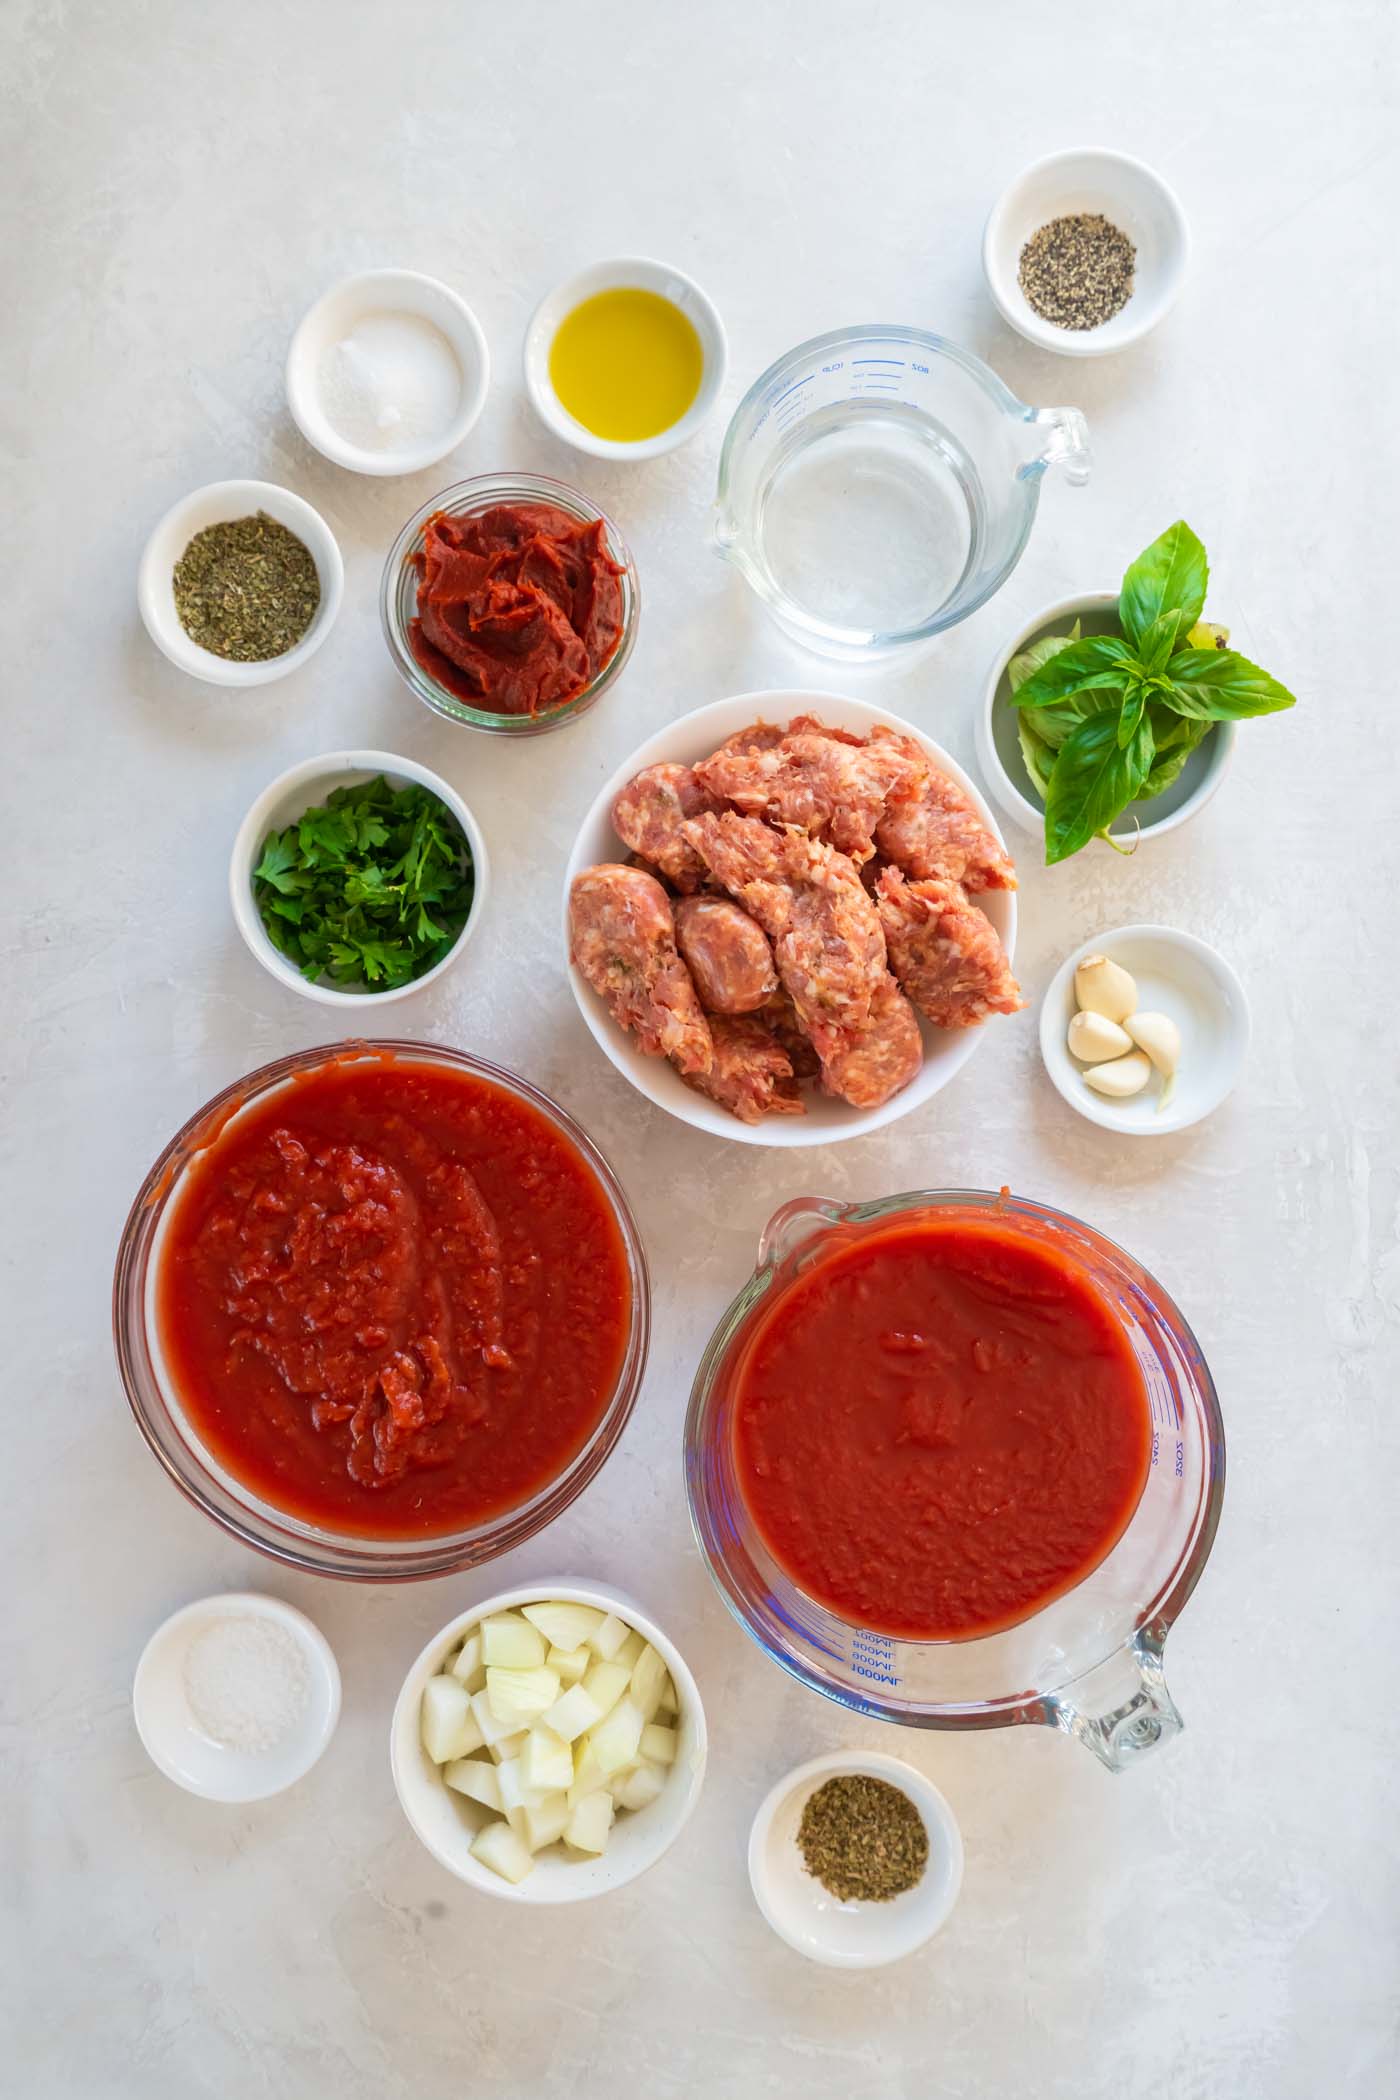 Ingredients for spaghetti sauce recipe.